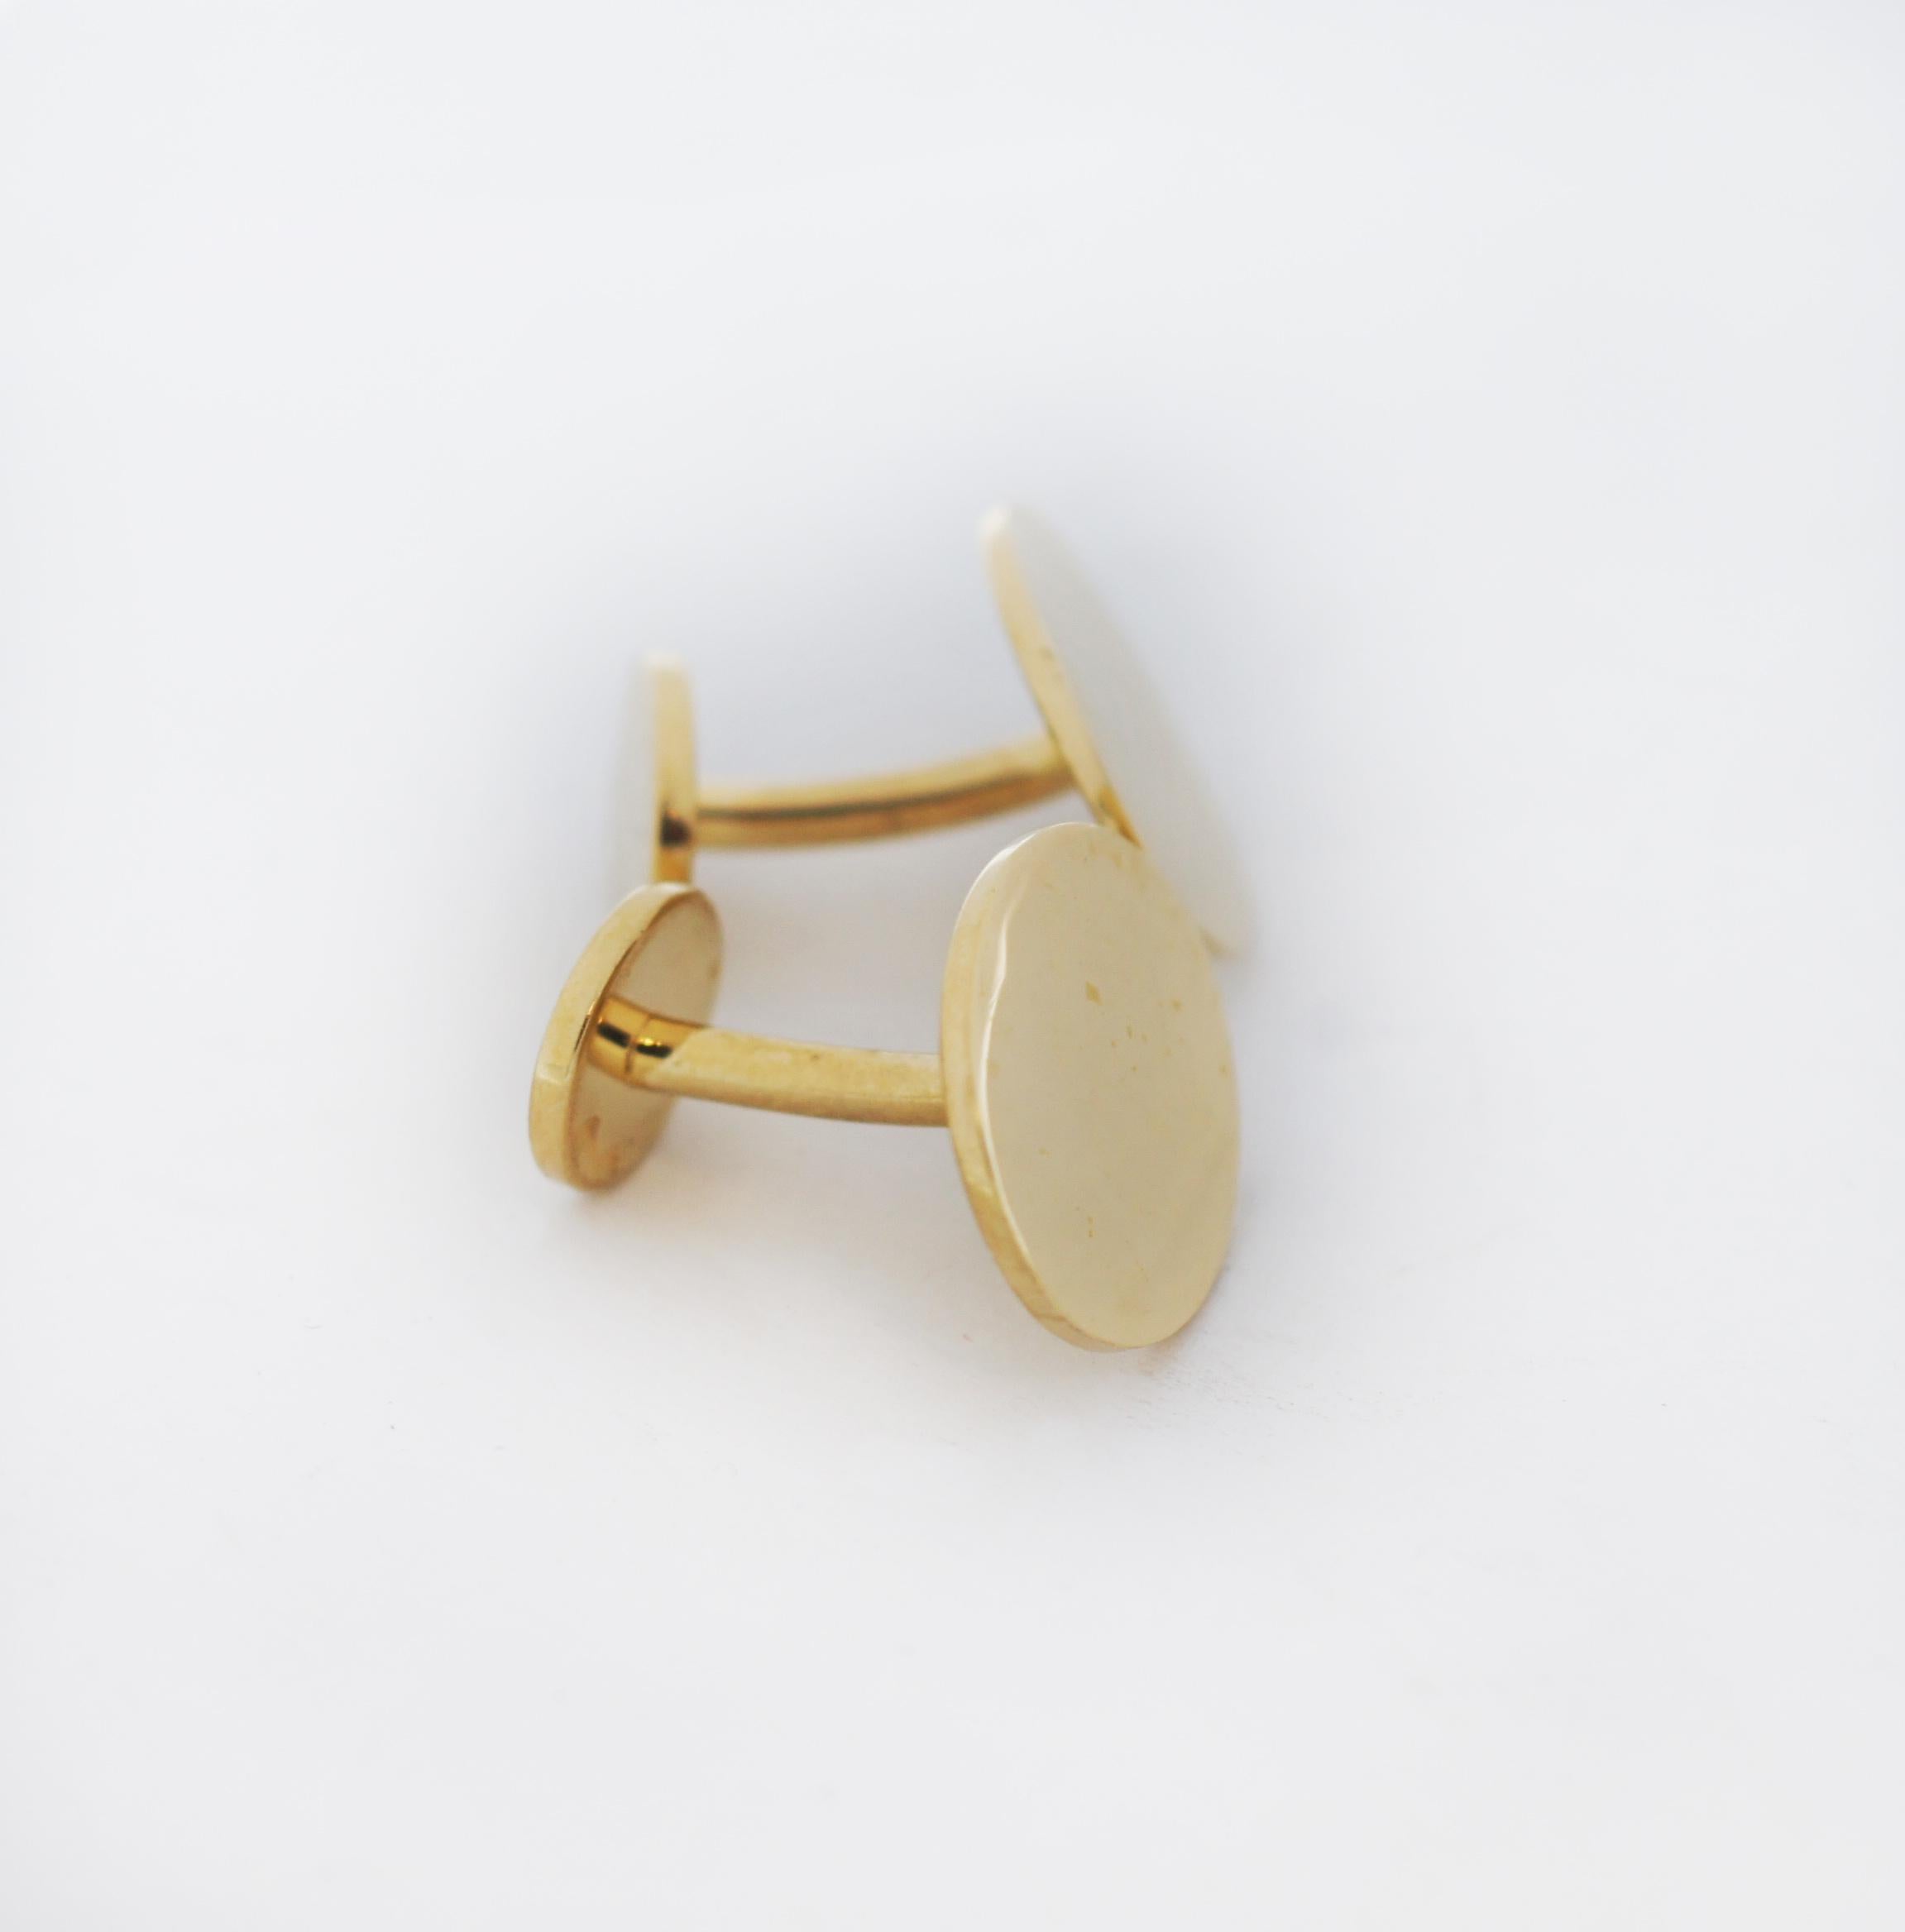 Lovely find with this Vintage 
Tiffany & Co. Simple and elegant cuff links. 
Made in 2002. This cufflinks are in an smooth oval design
Details:
Metal: 18K Yellow Gold
Hallmarked: (c)2002Tiffany & Co 750
Approx. Measurements: .75